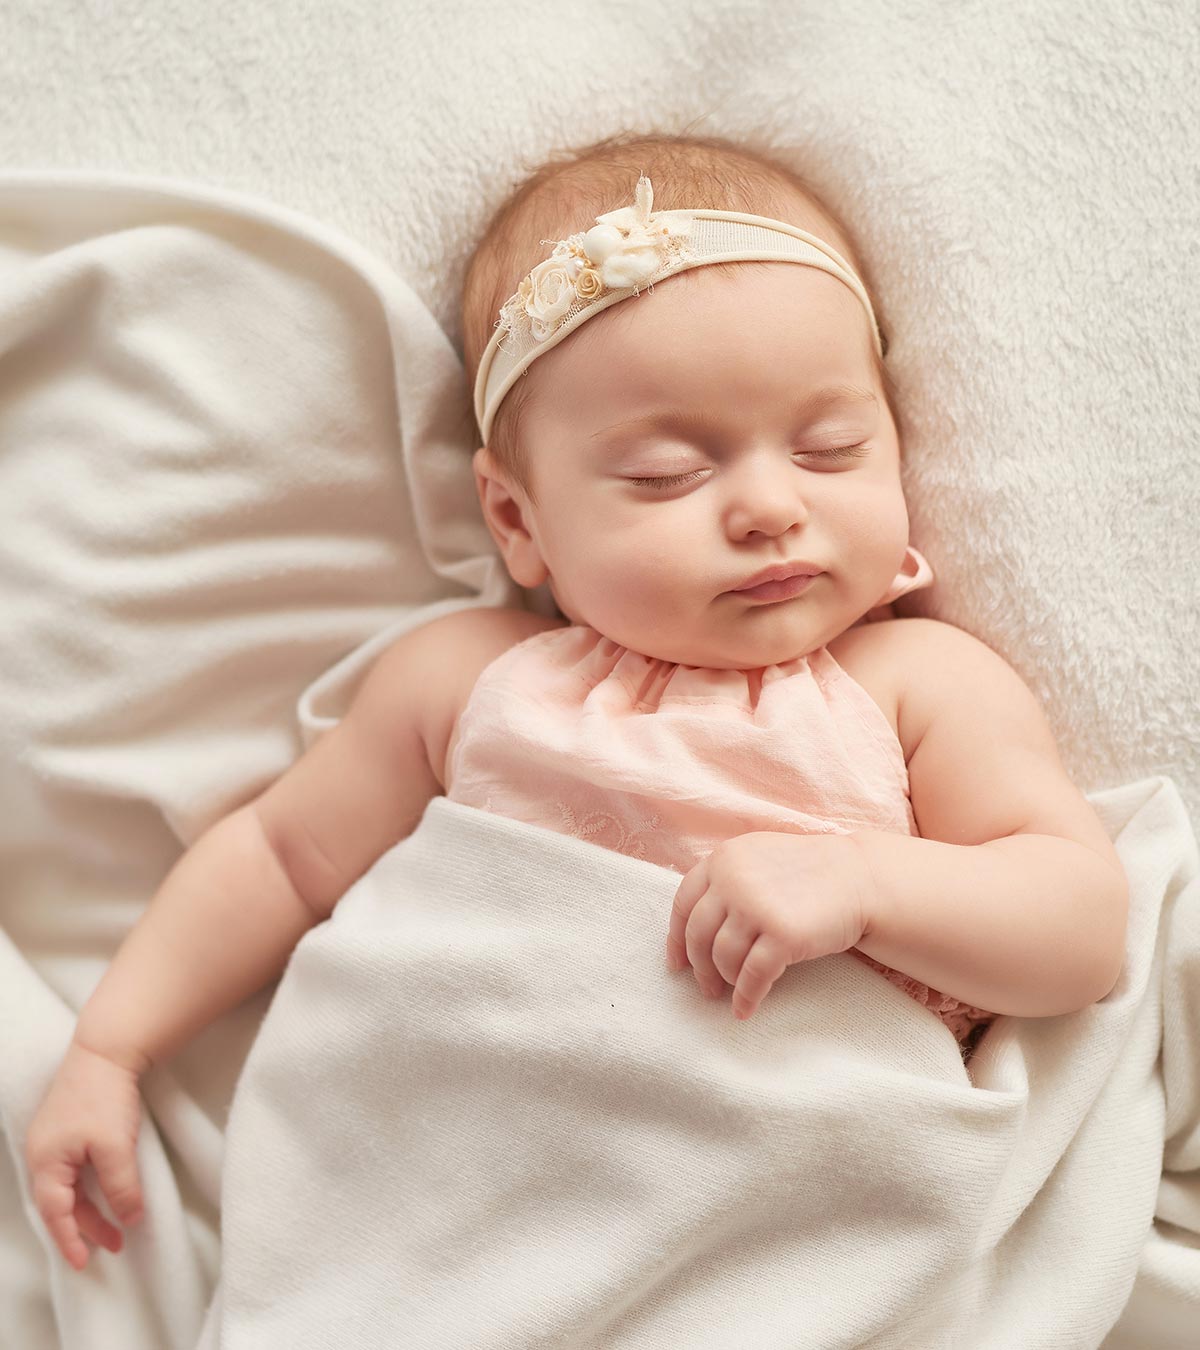 13 Baby Sleep Cues: How to Identify Them And Tips To Put Baby To Sleep